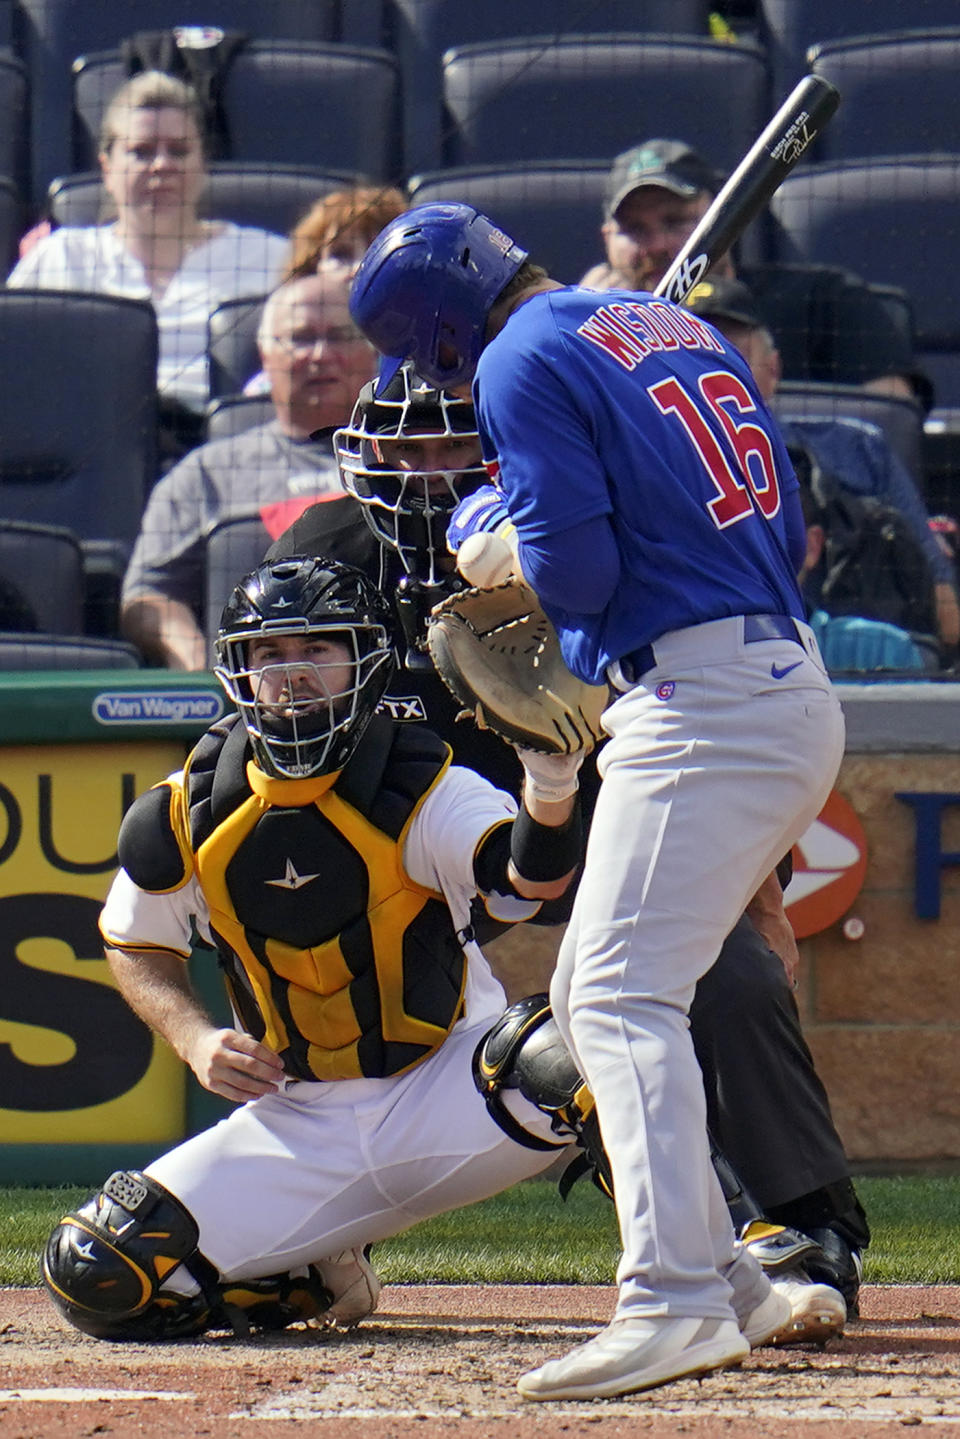 Chicago Cubs' Patrick Wisdom (16) is hit by a pitch from Pittsburgh Pirates relief pitcher Duane Underwood Jr. during the seventh inning of a baseball game in Pittsburgh, Sunday, Sept. 25, 2022. (AP Photo/Gene J. Puskar)